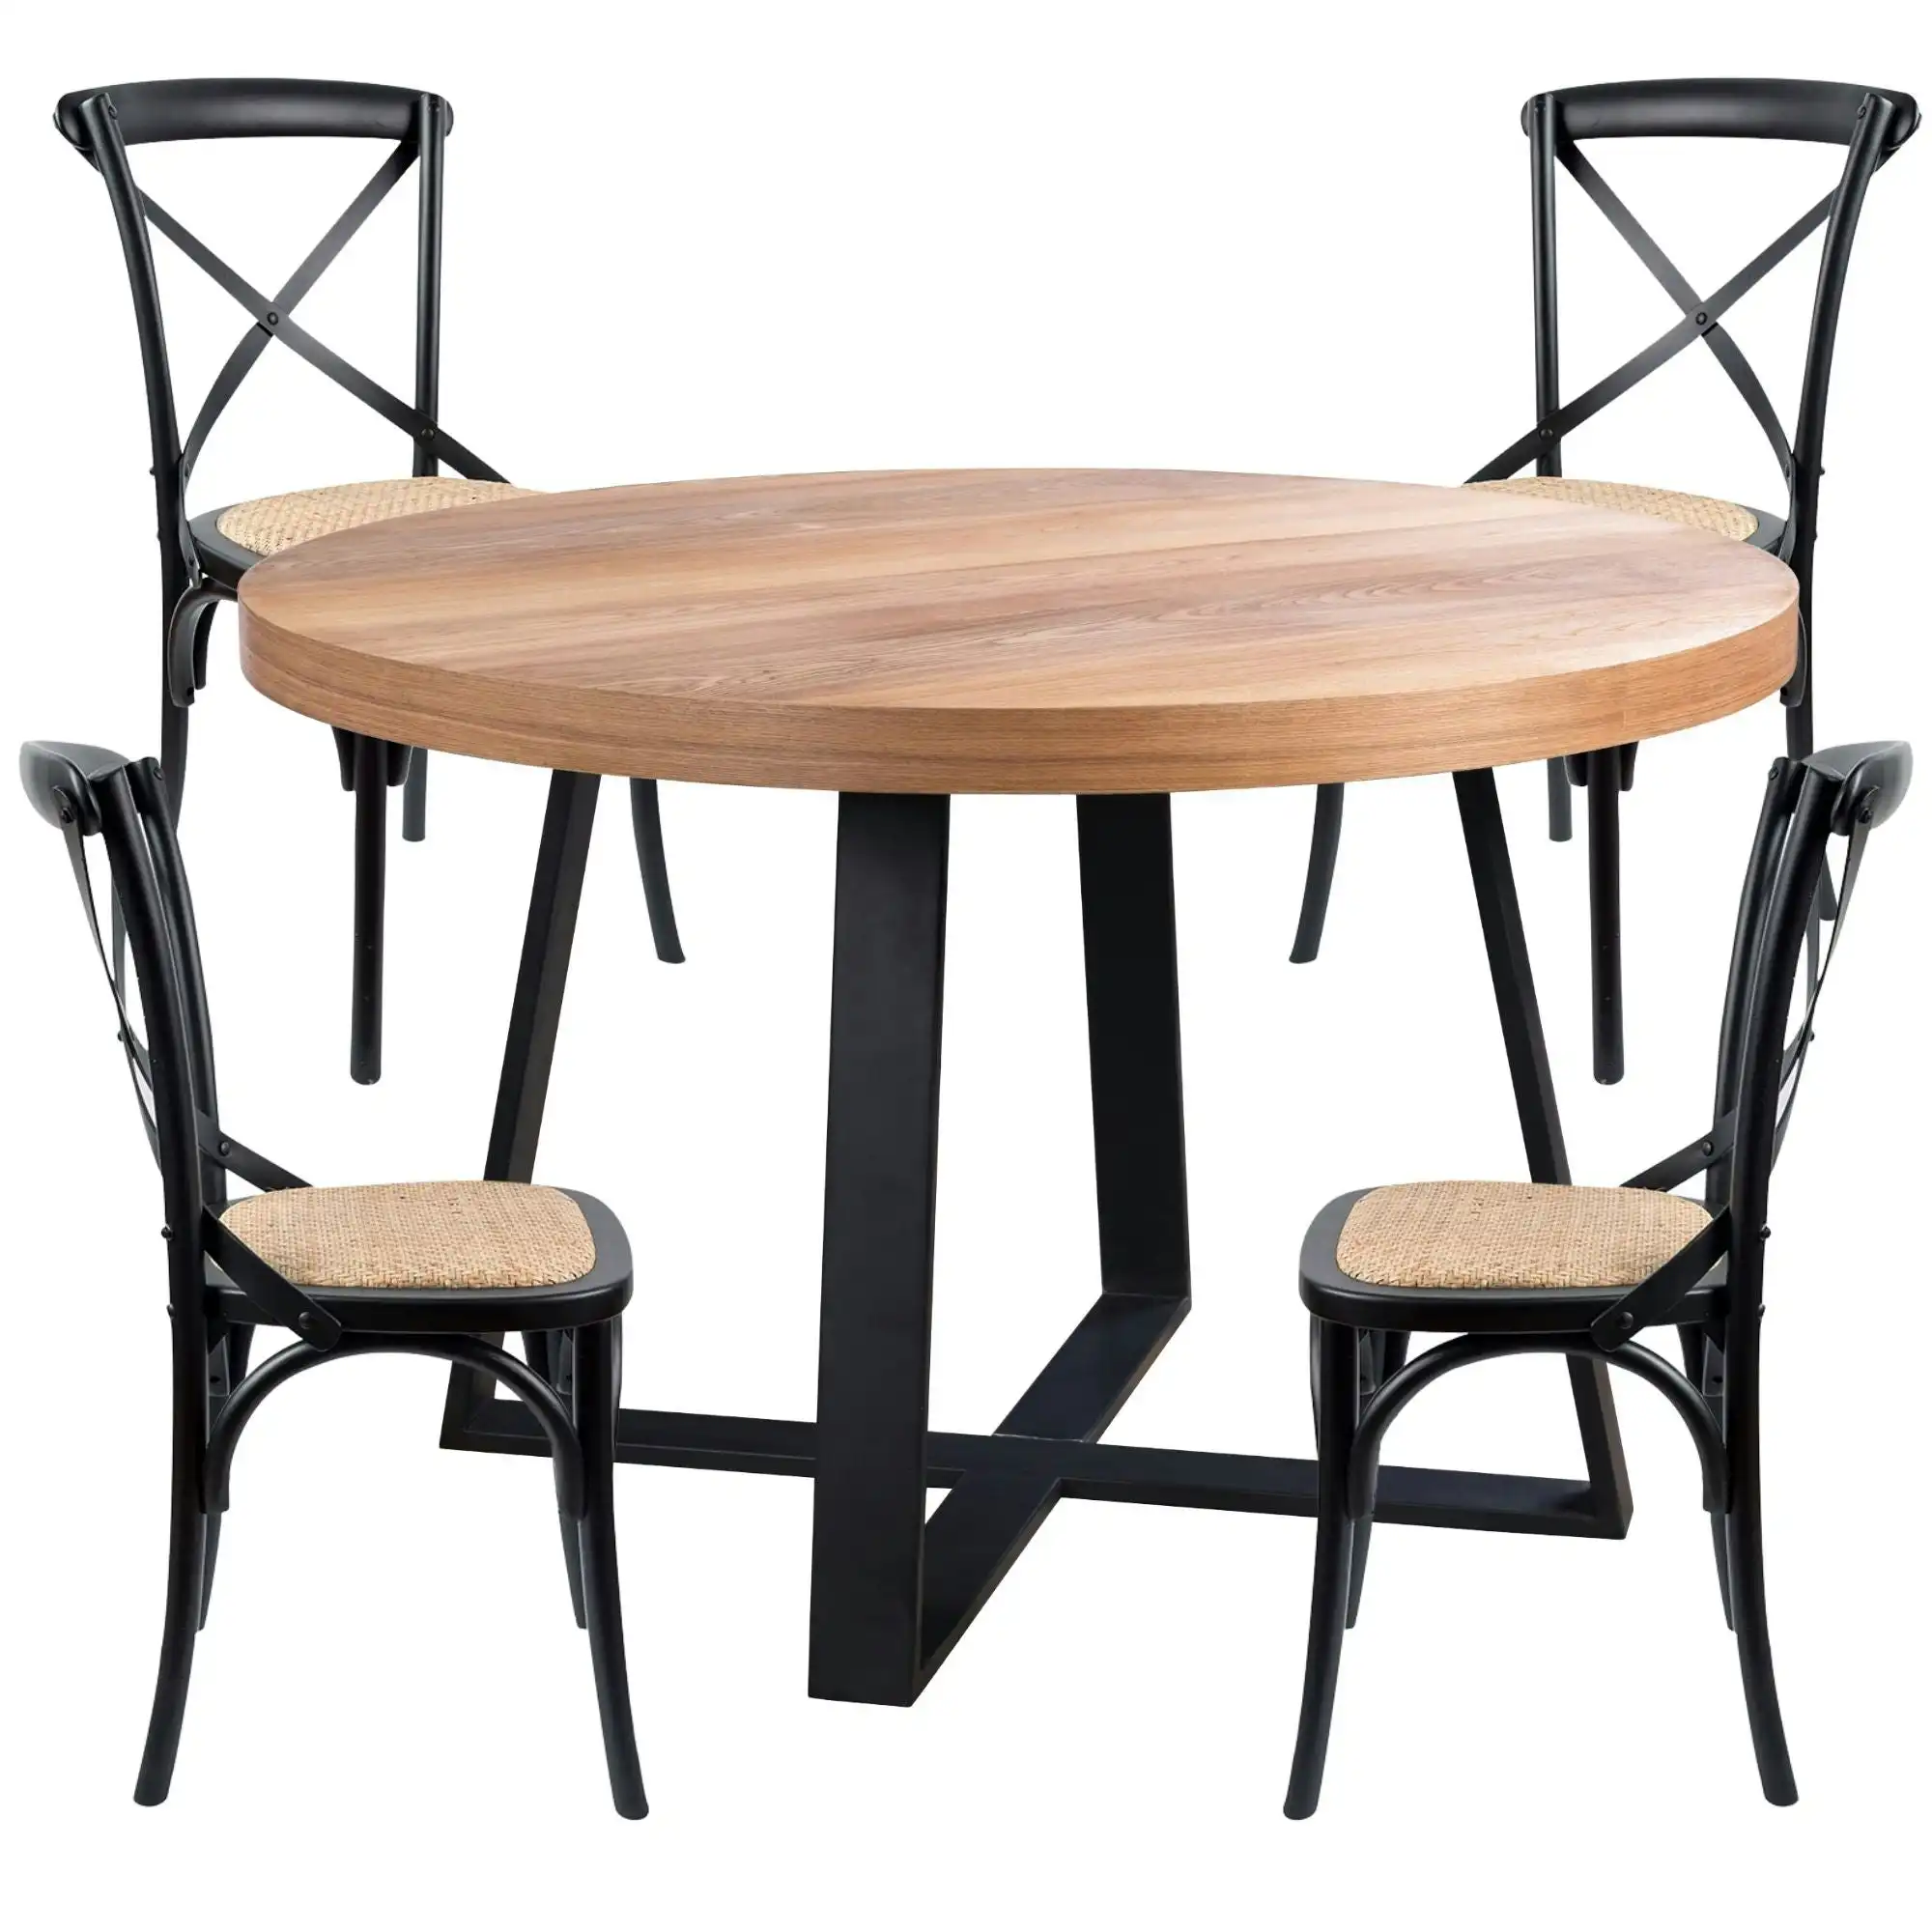 Petunia  5pc 120cm Round Dining Table X-back Chair Set